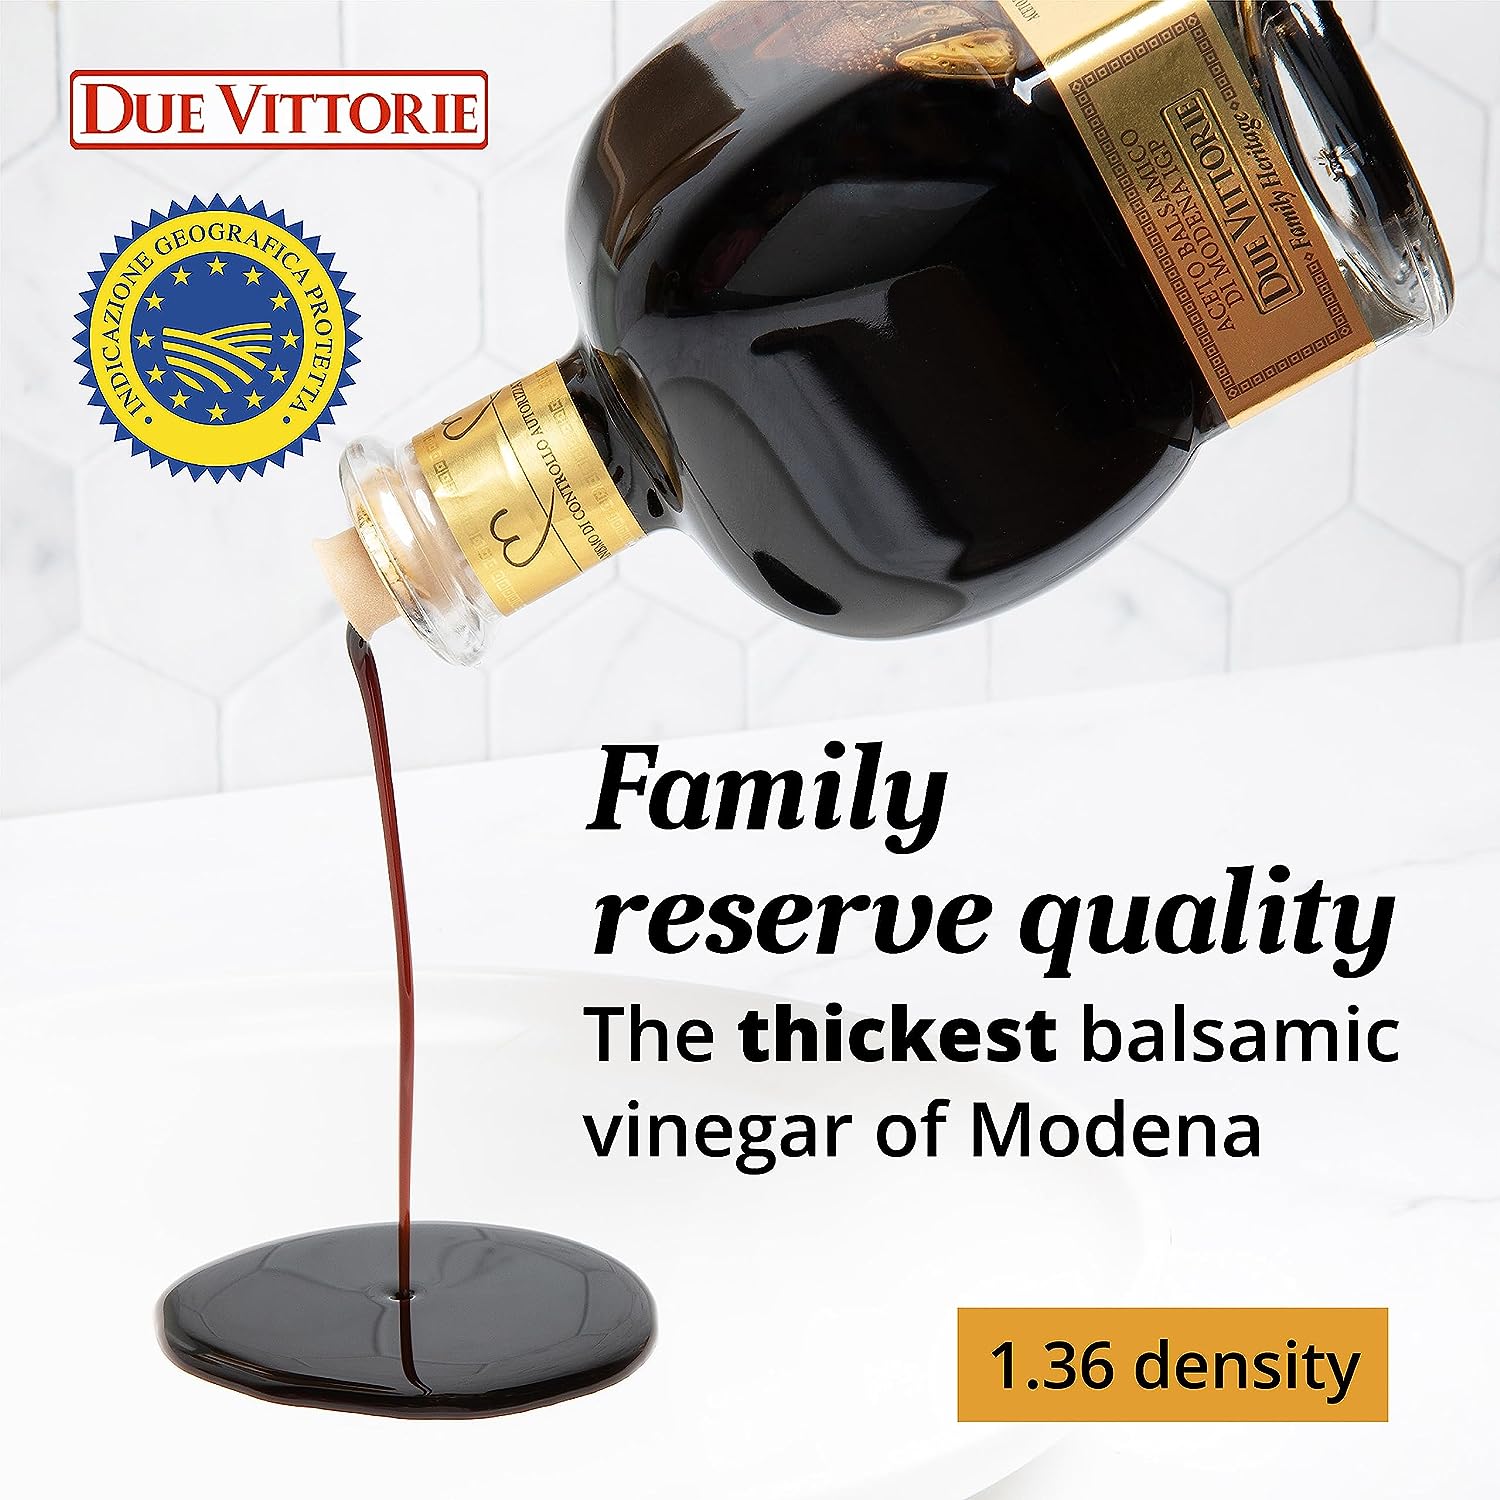 Famiglia Gold IGP Extra Dense Balsamic Vinegar - with Box and Pourer - by Due Vittorie